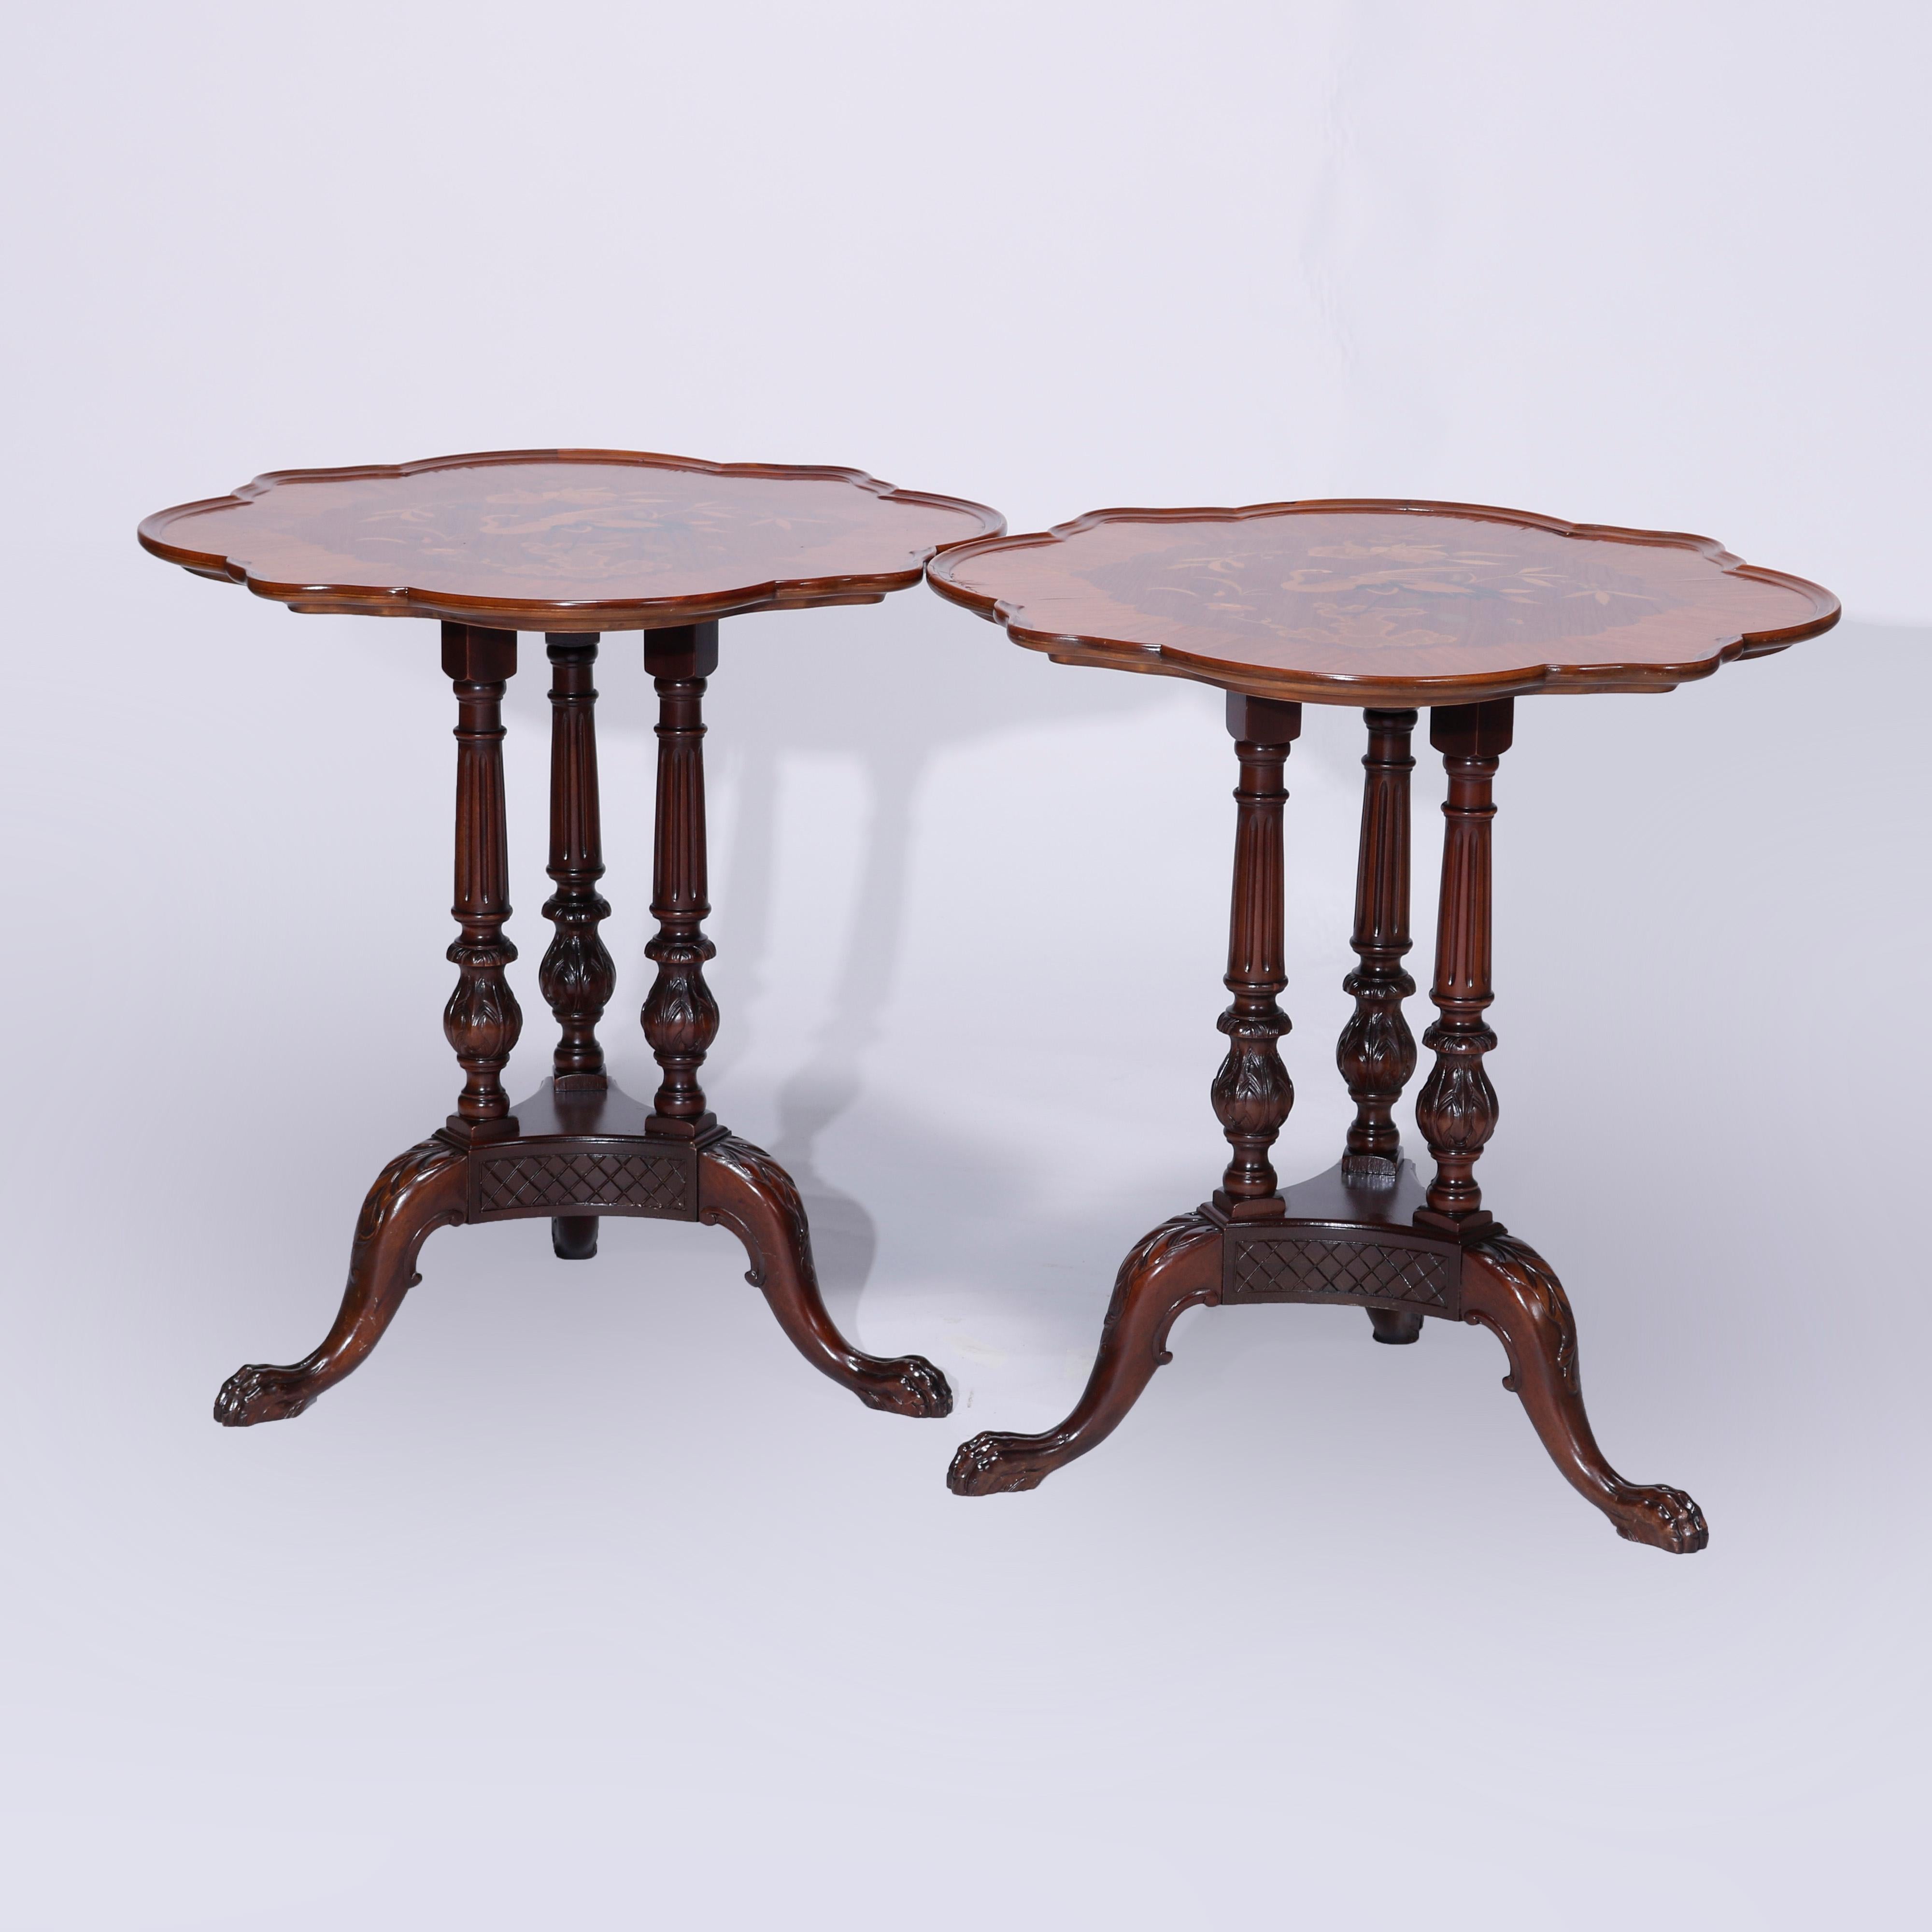 Antique Heron Satinwood Marquetry Scalloped Triple Pedestal Side Tables, c1930 For Sale 2